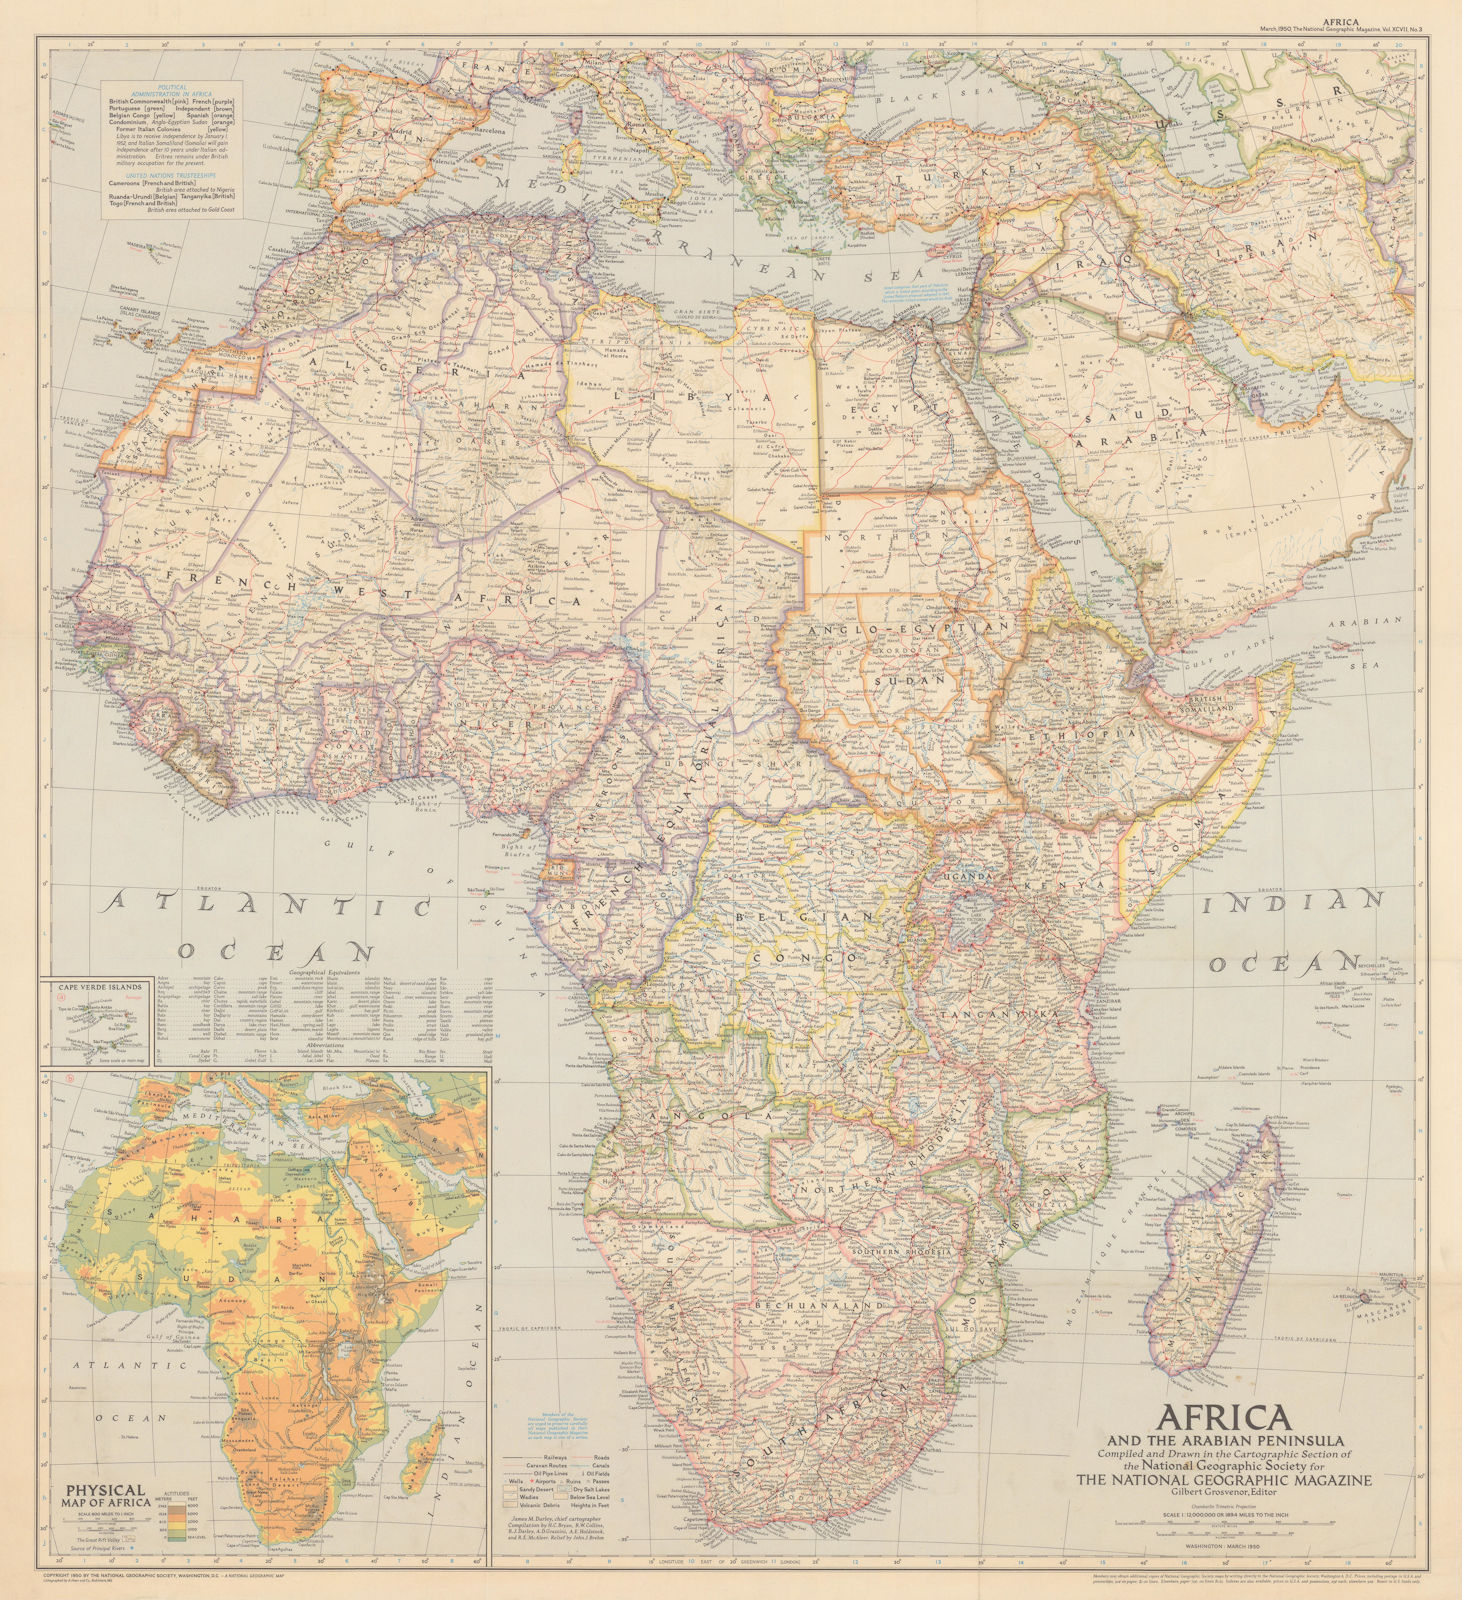 Late colonial Africa & the Arabian Peninsula. National Geographic 1950 old map